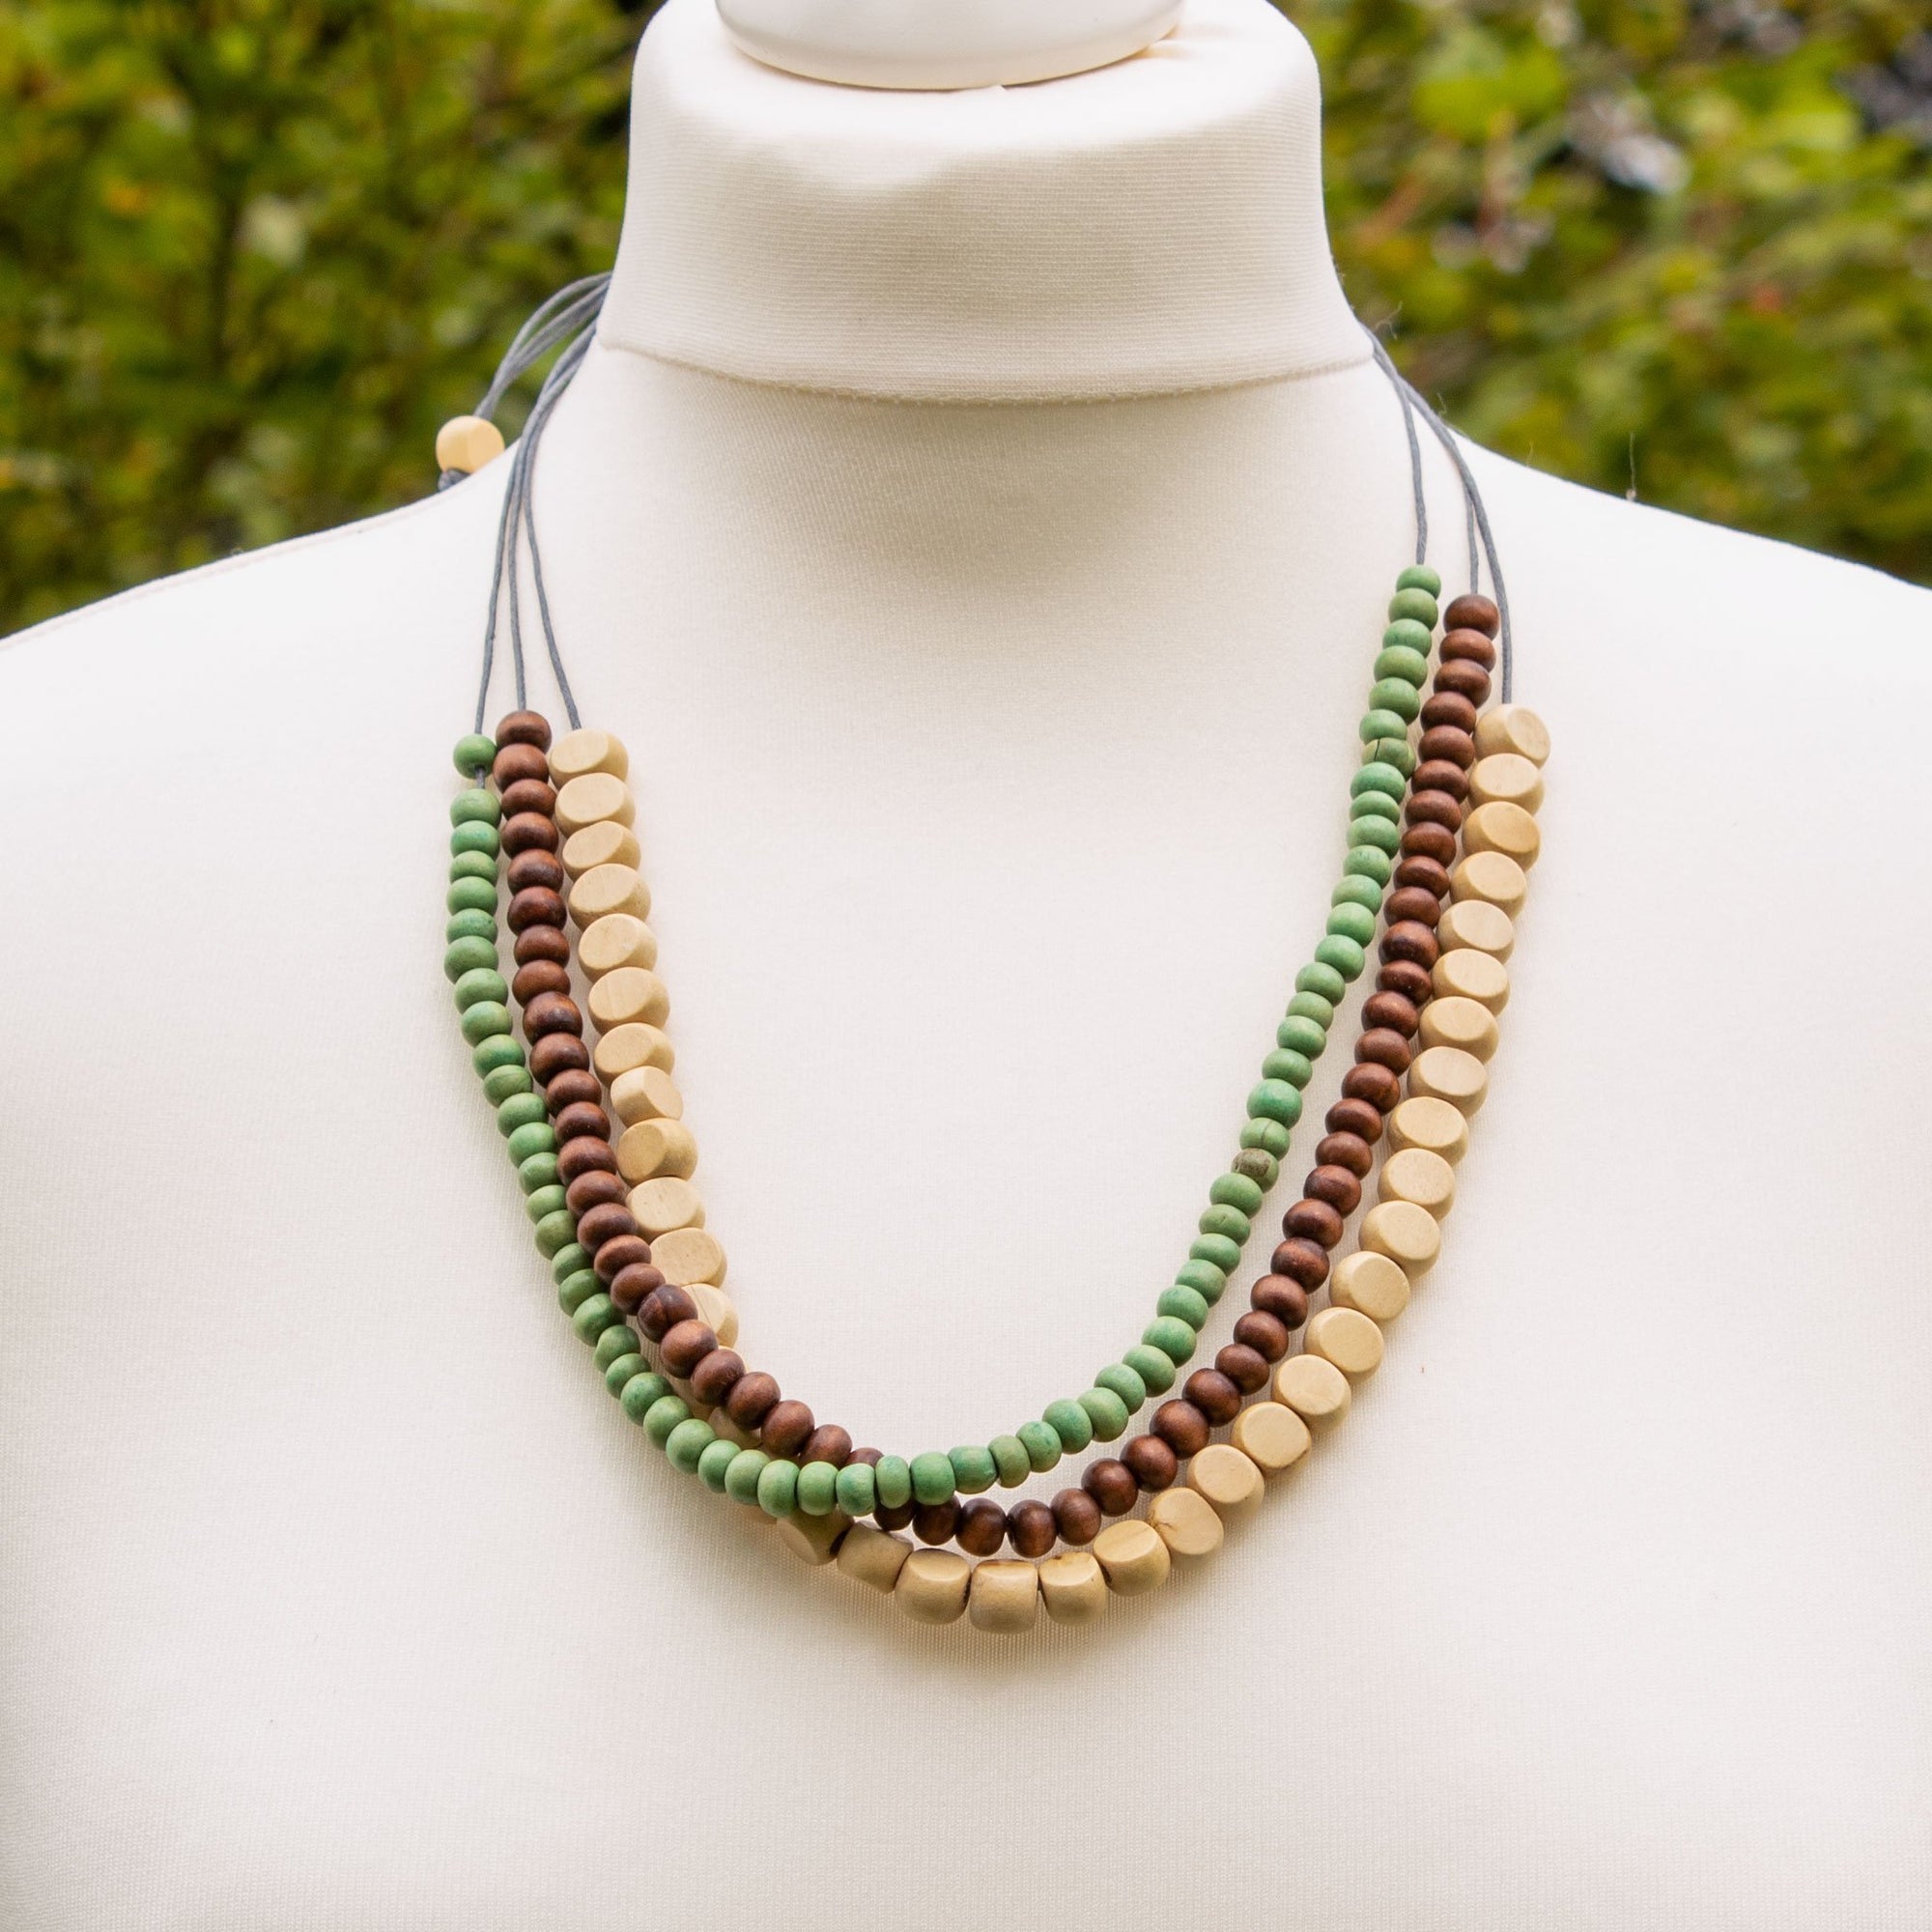 Wooden Beads Antique Necklace - Fashionvalley